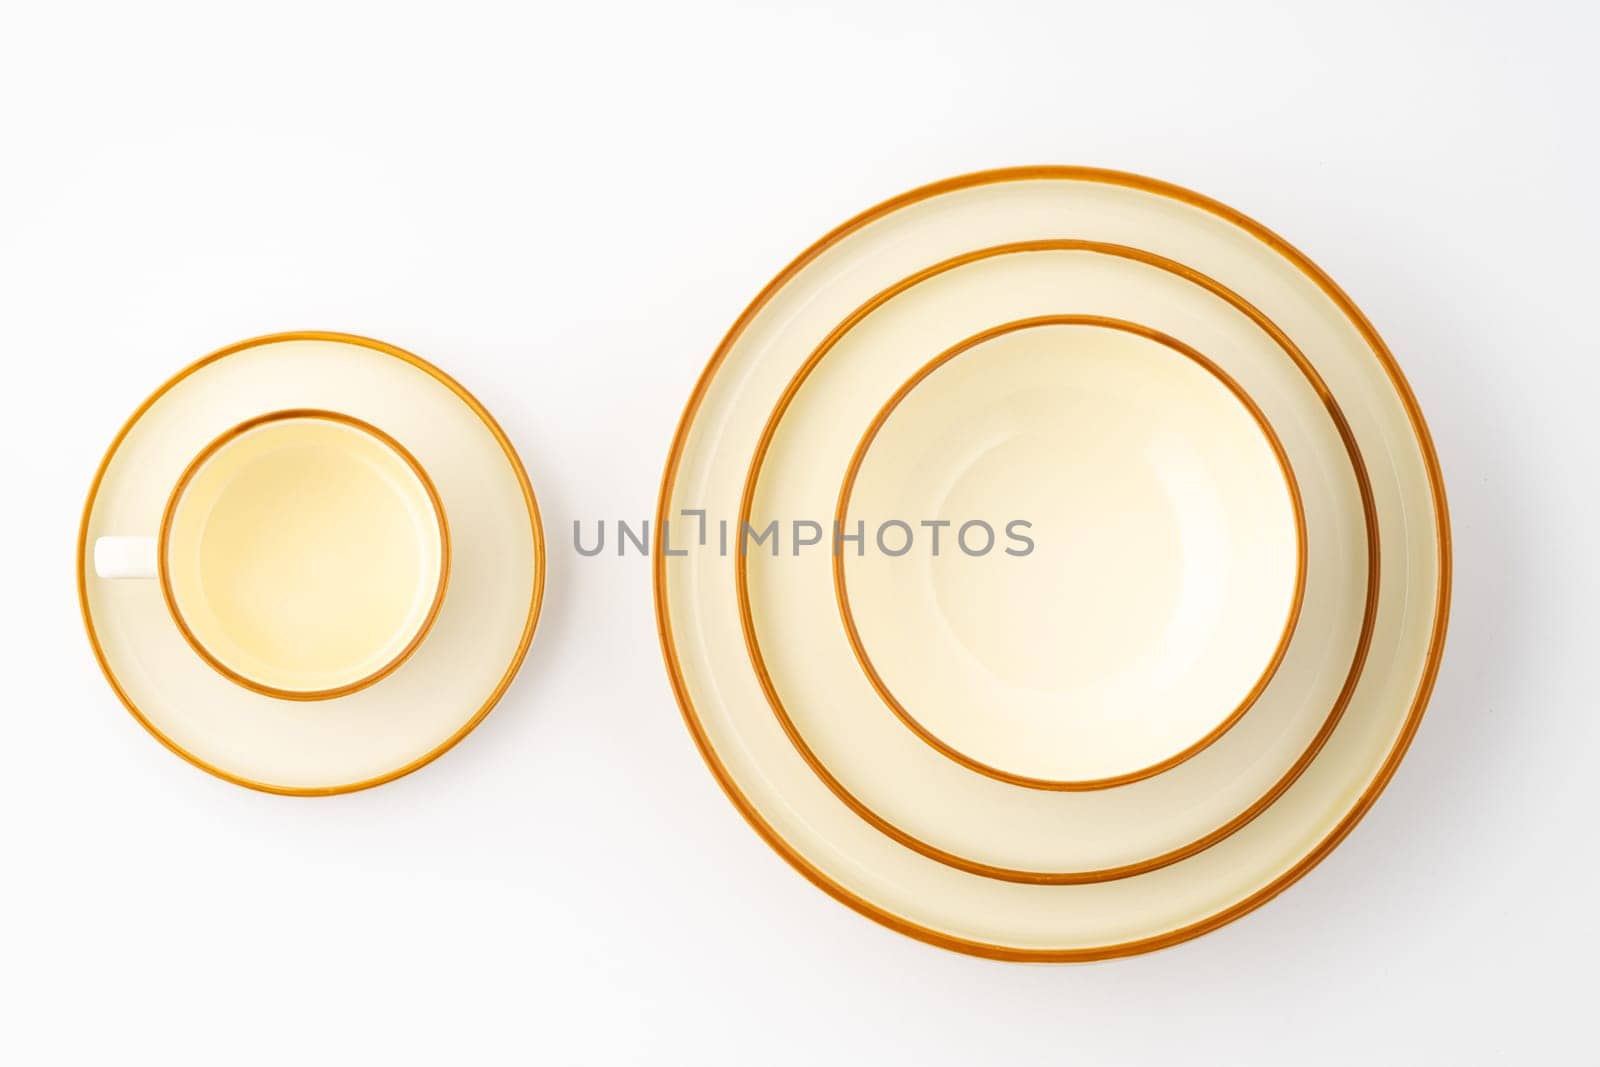 A set of white and brown ceramic plate and cup on a white background. Top view by A_Karim